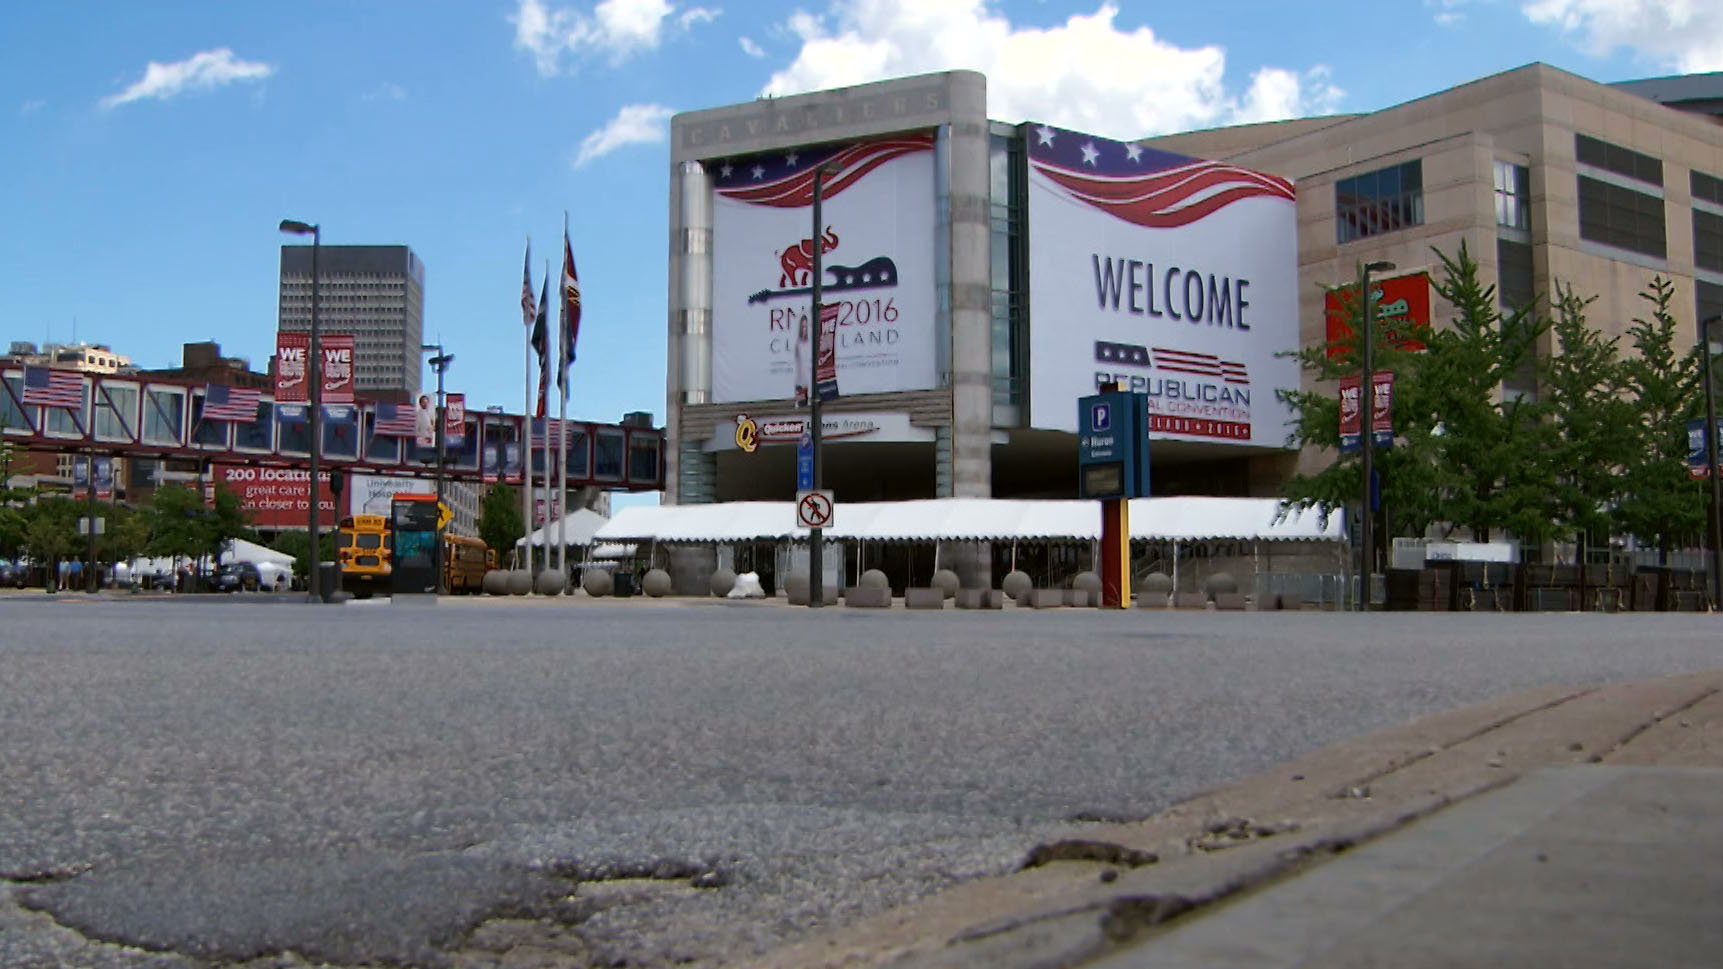 Cleveland’s economy in spotlight during Republican convention